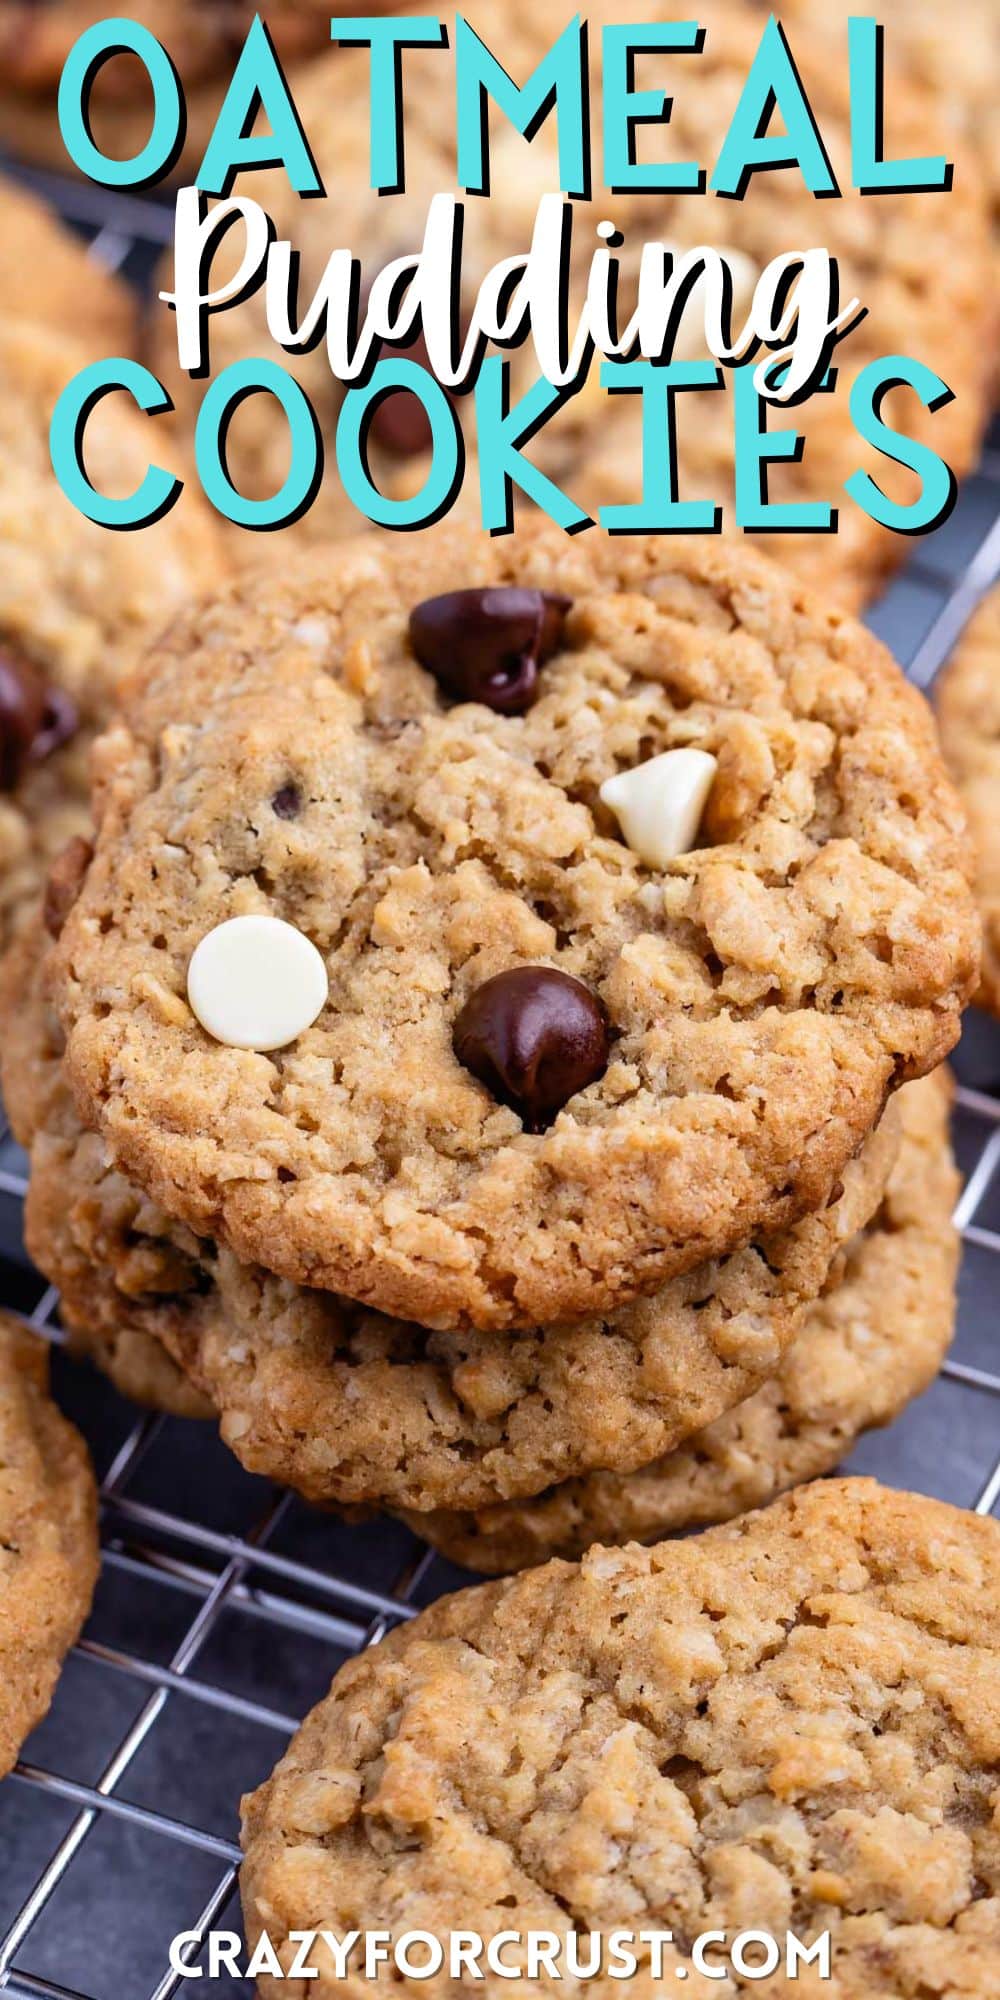 stacked oatmeal cookies with white and regular chocolate chips baked in with words on the image.